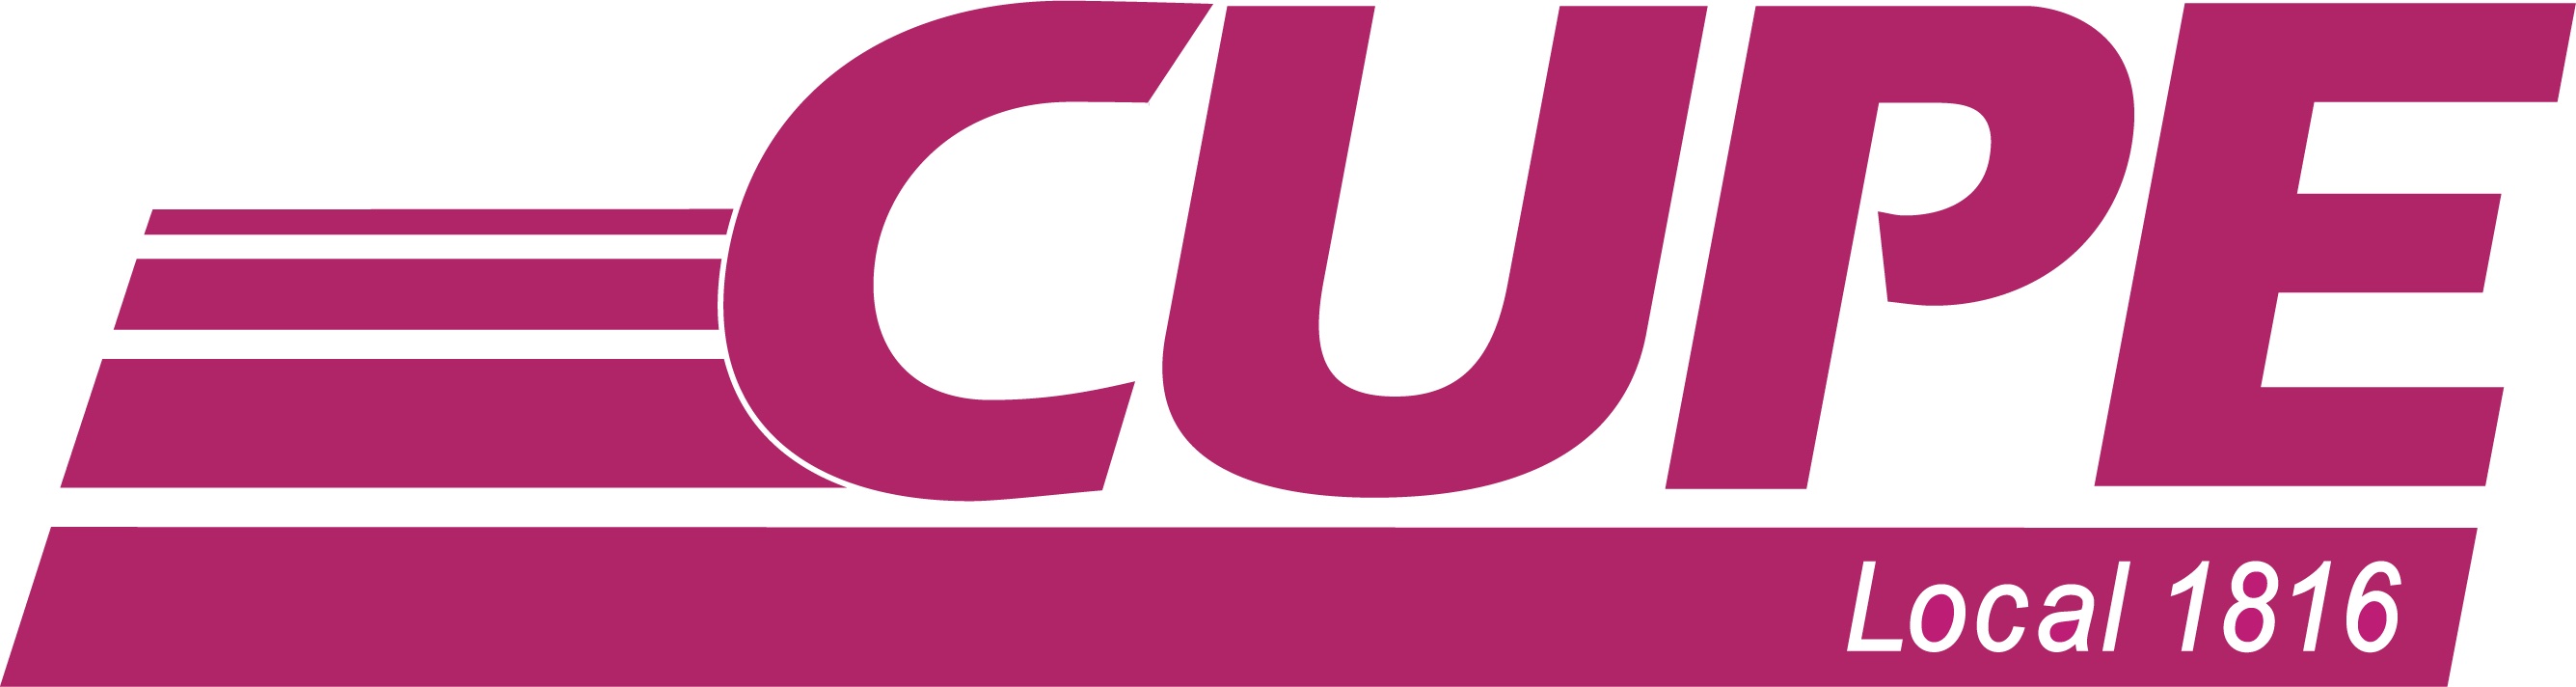 in partnership with CUPE 1816